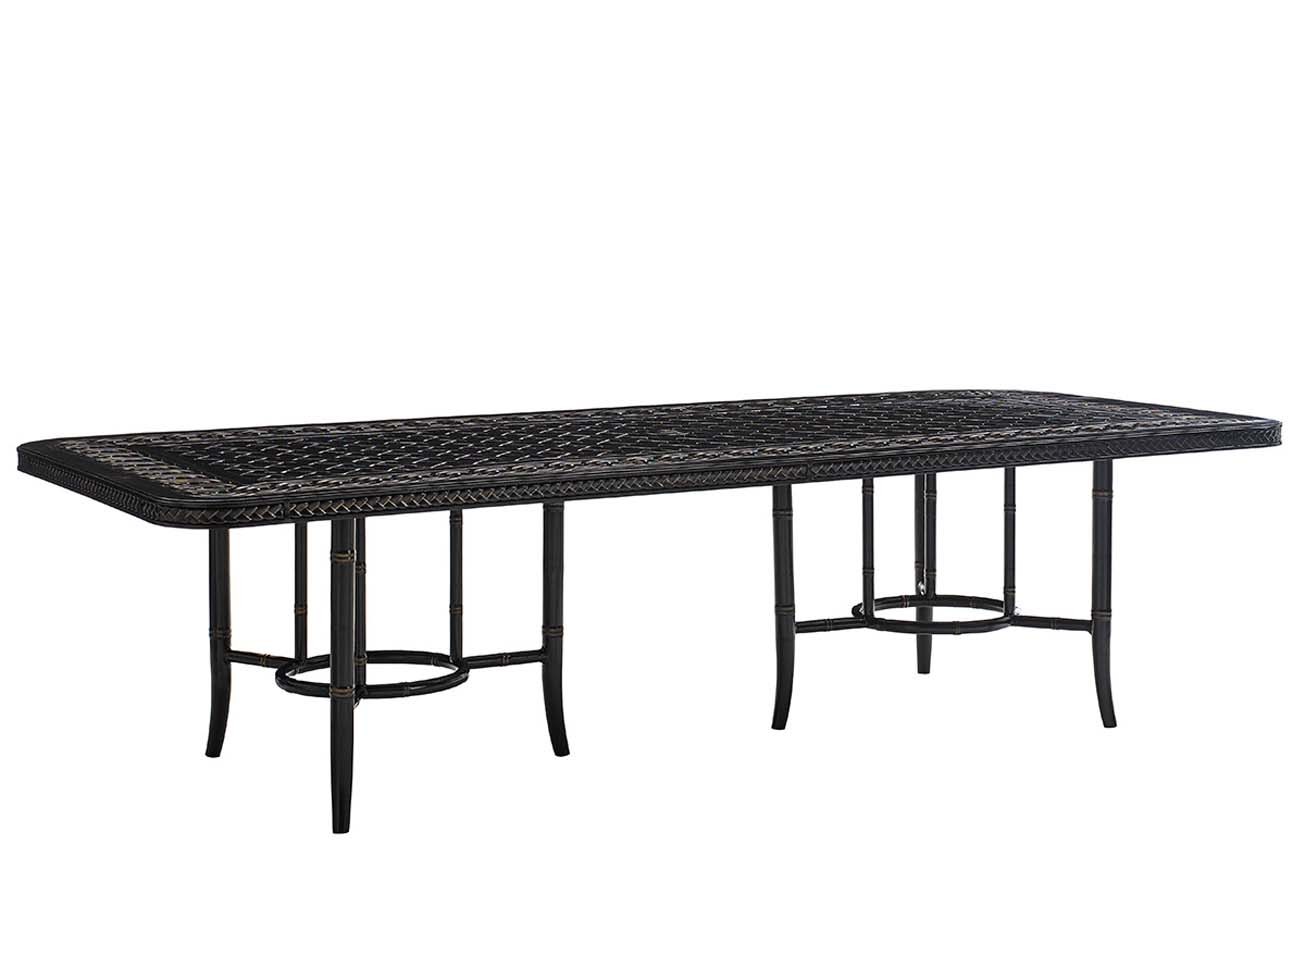 Marimba rectangular dining table top from hausers patio in san diego ca luxury outdoor living by hausers patio luxury outdoor living by hausers patio